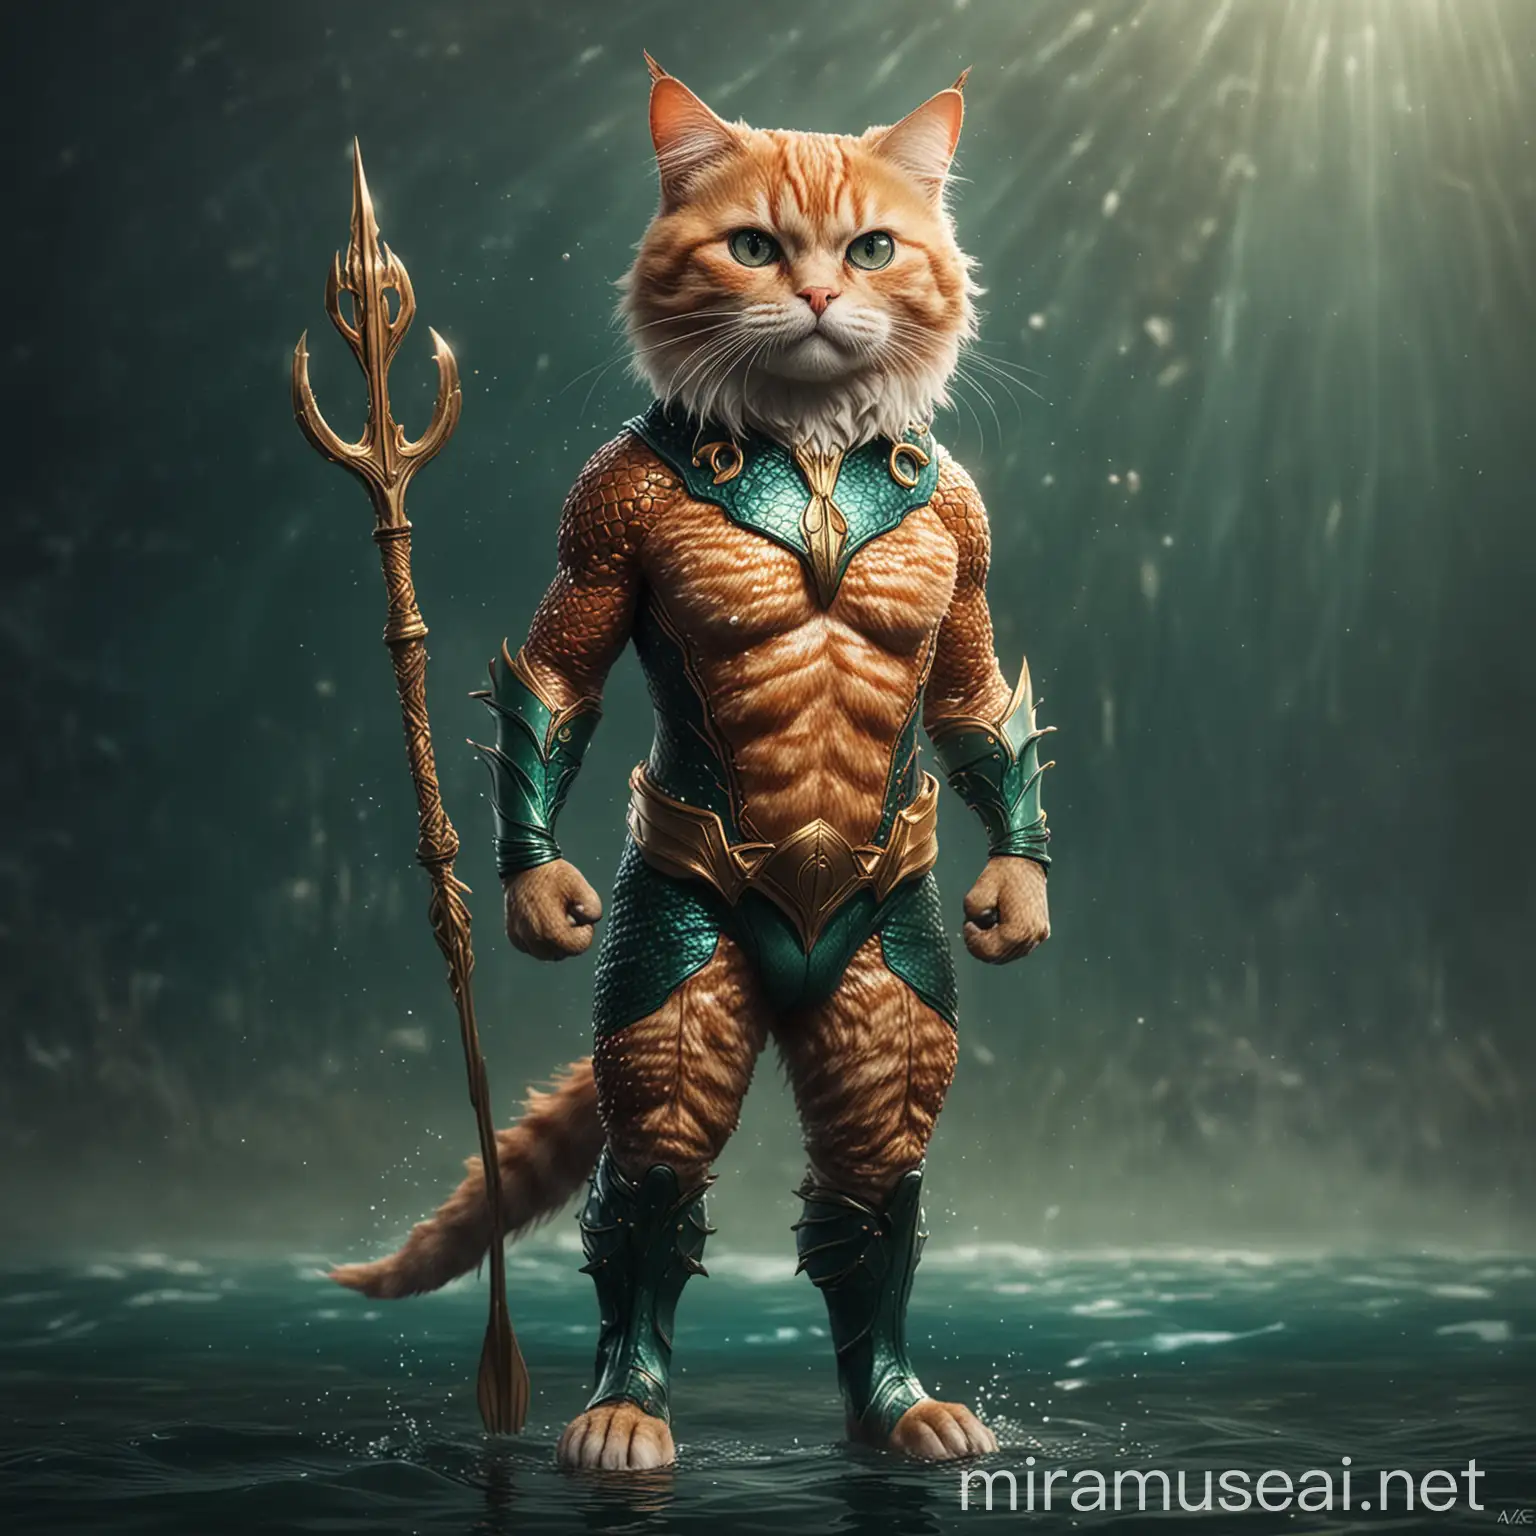 Majestic Cat Pose Inspired by Aquaman Feline Stands Proud in Oceanic Ambiance